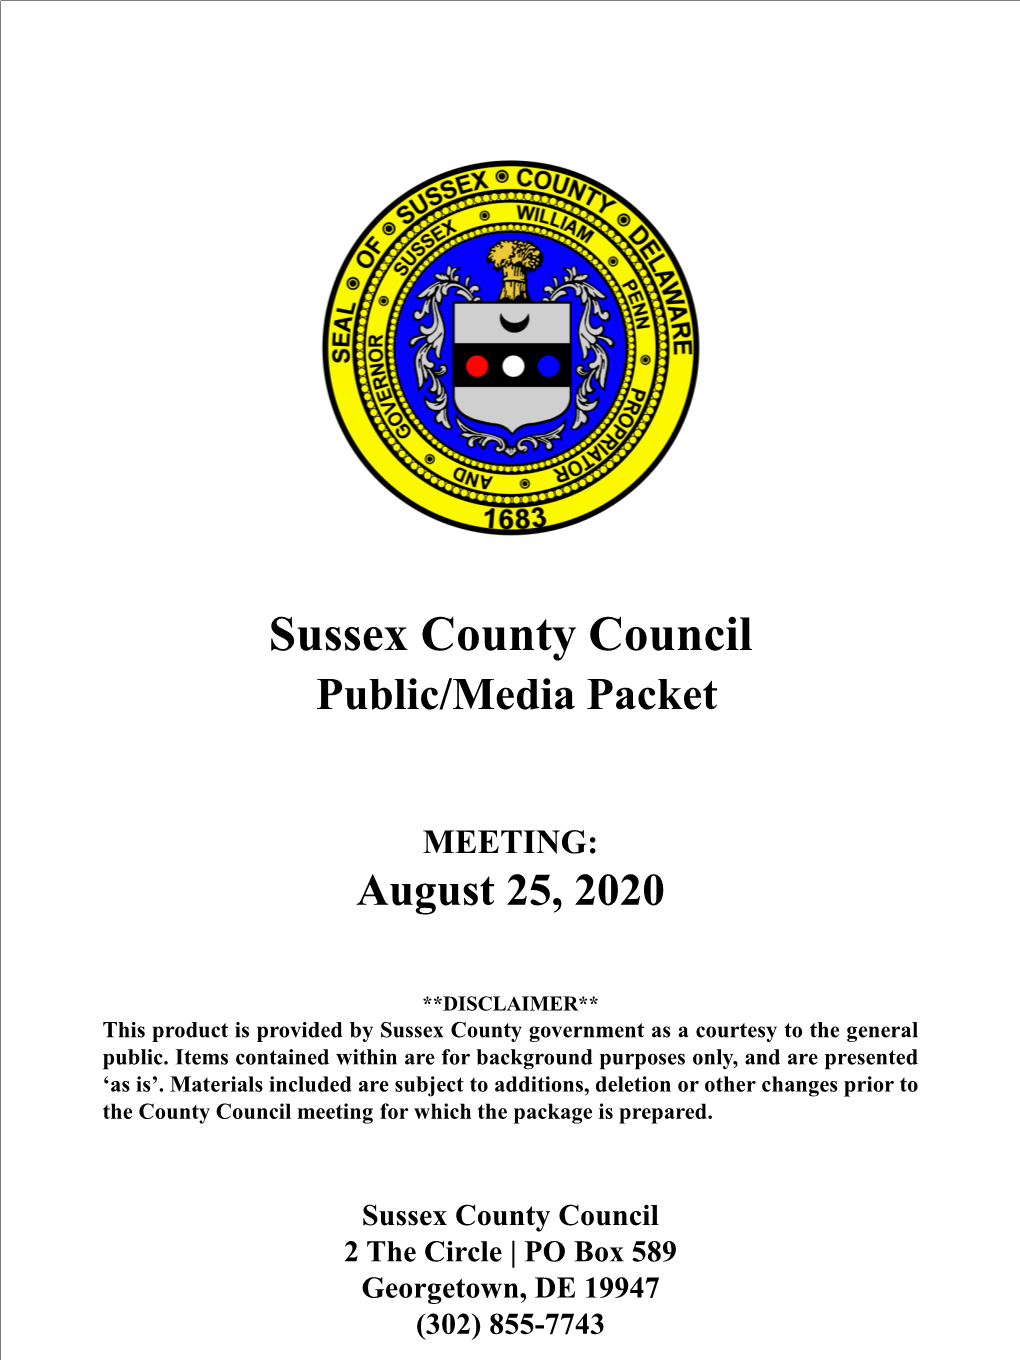 Sussex County Council Public/Media Packet